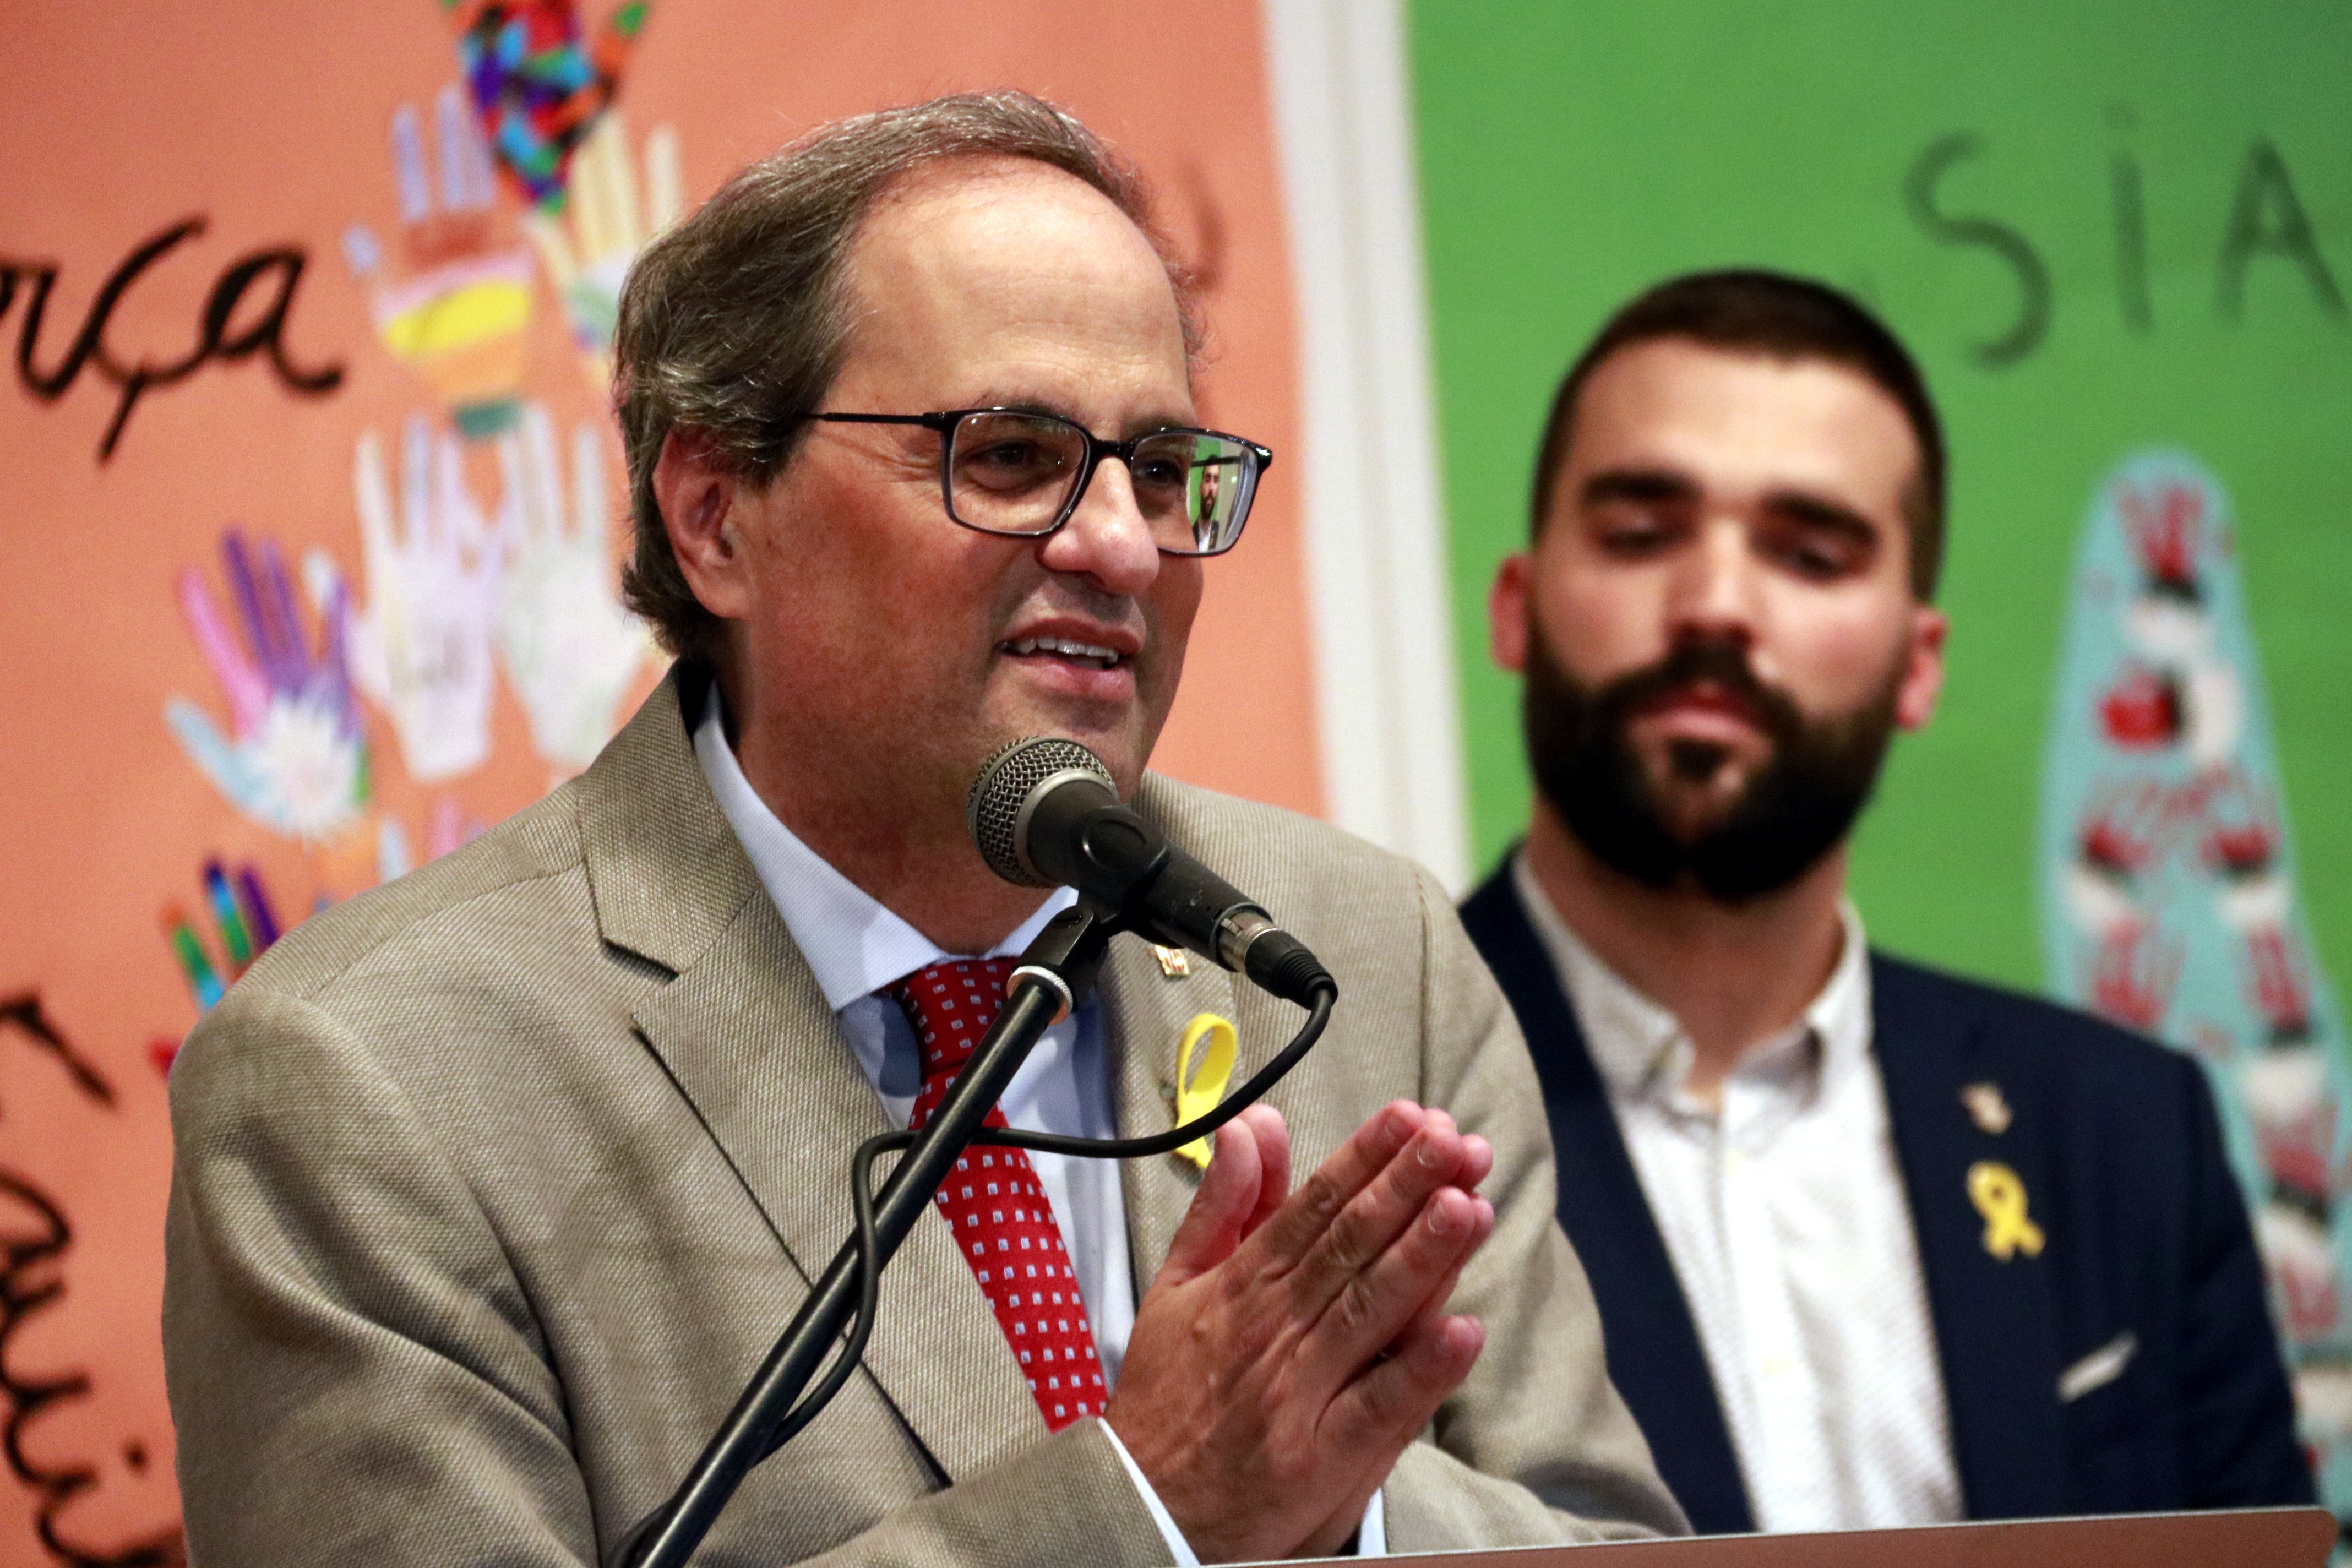 Torra: "The dawning of liberty on the horizon is very close for Catalonia"